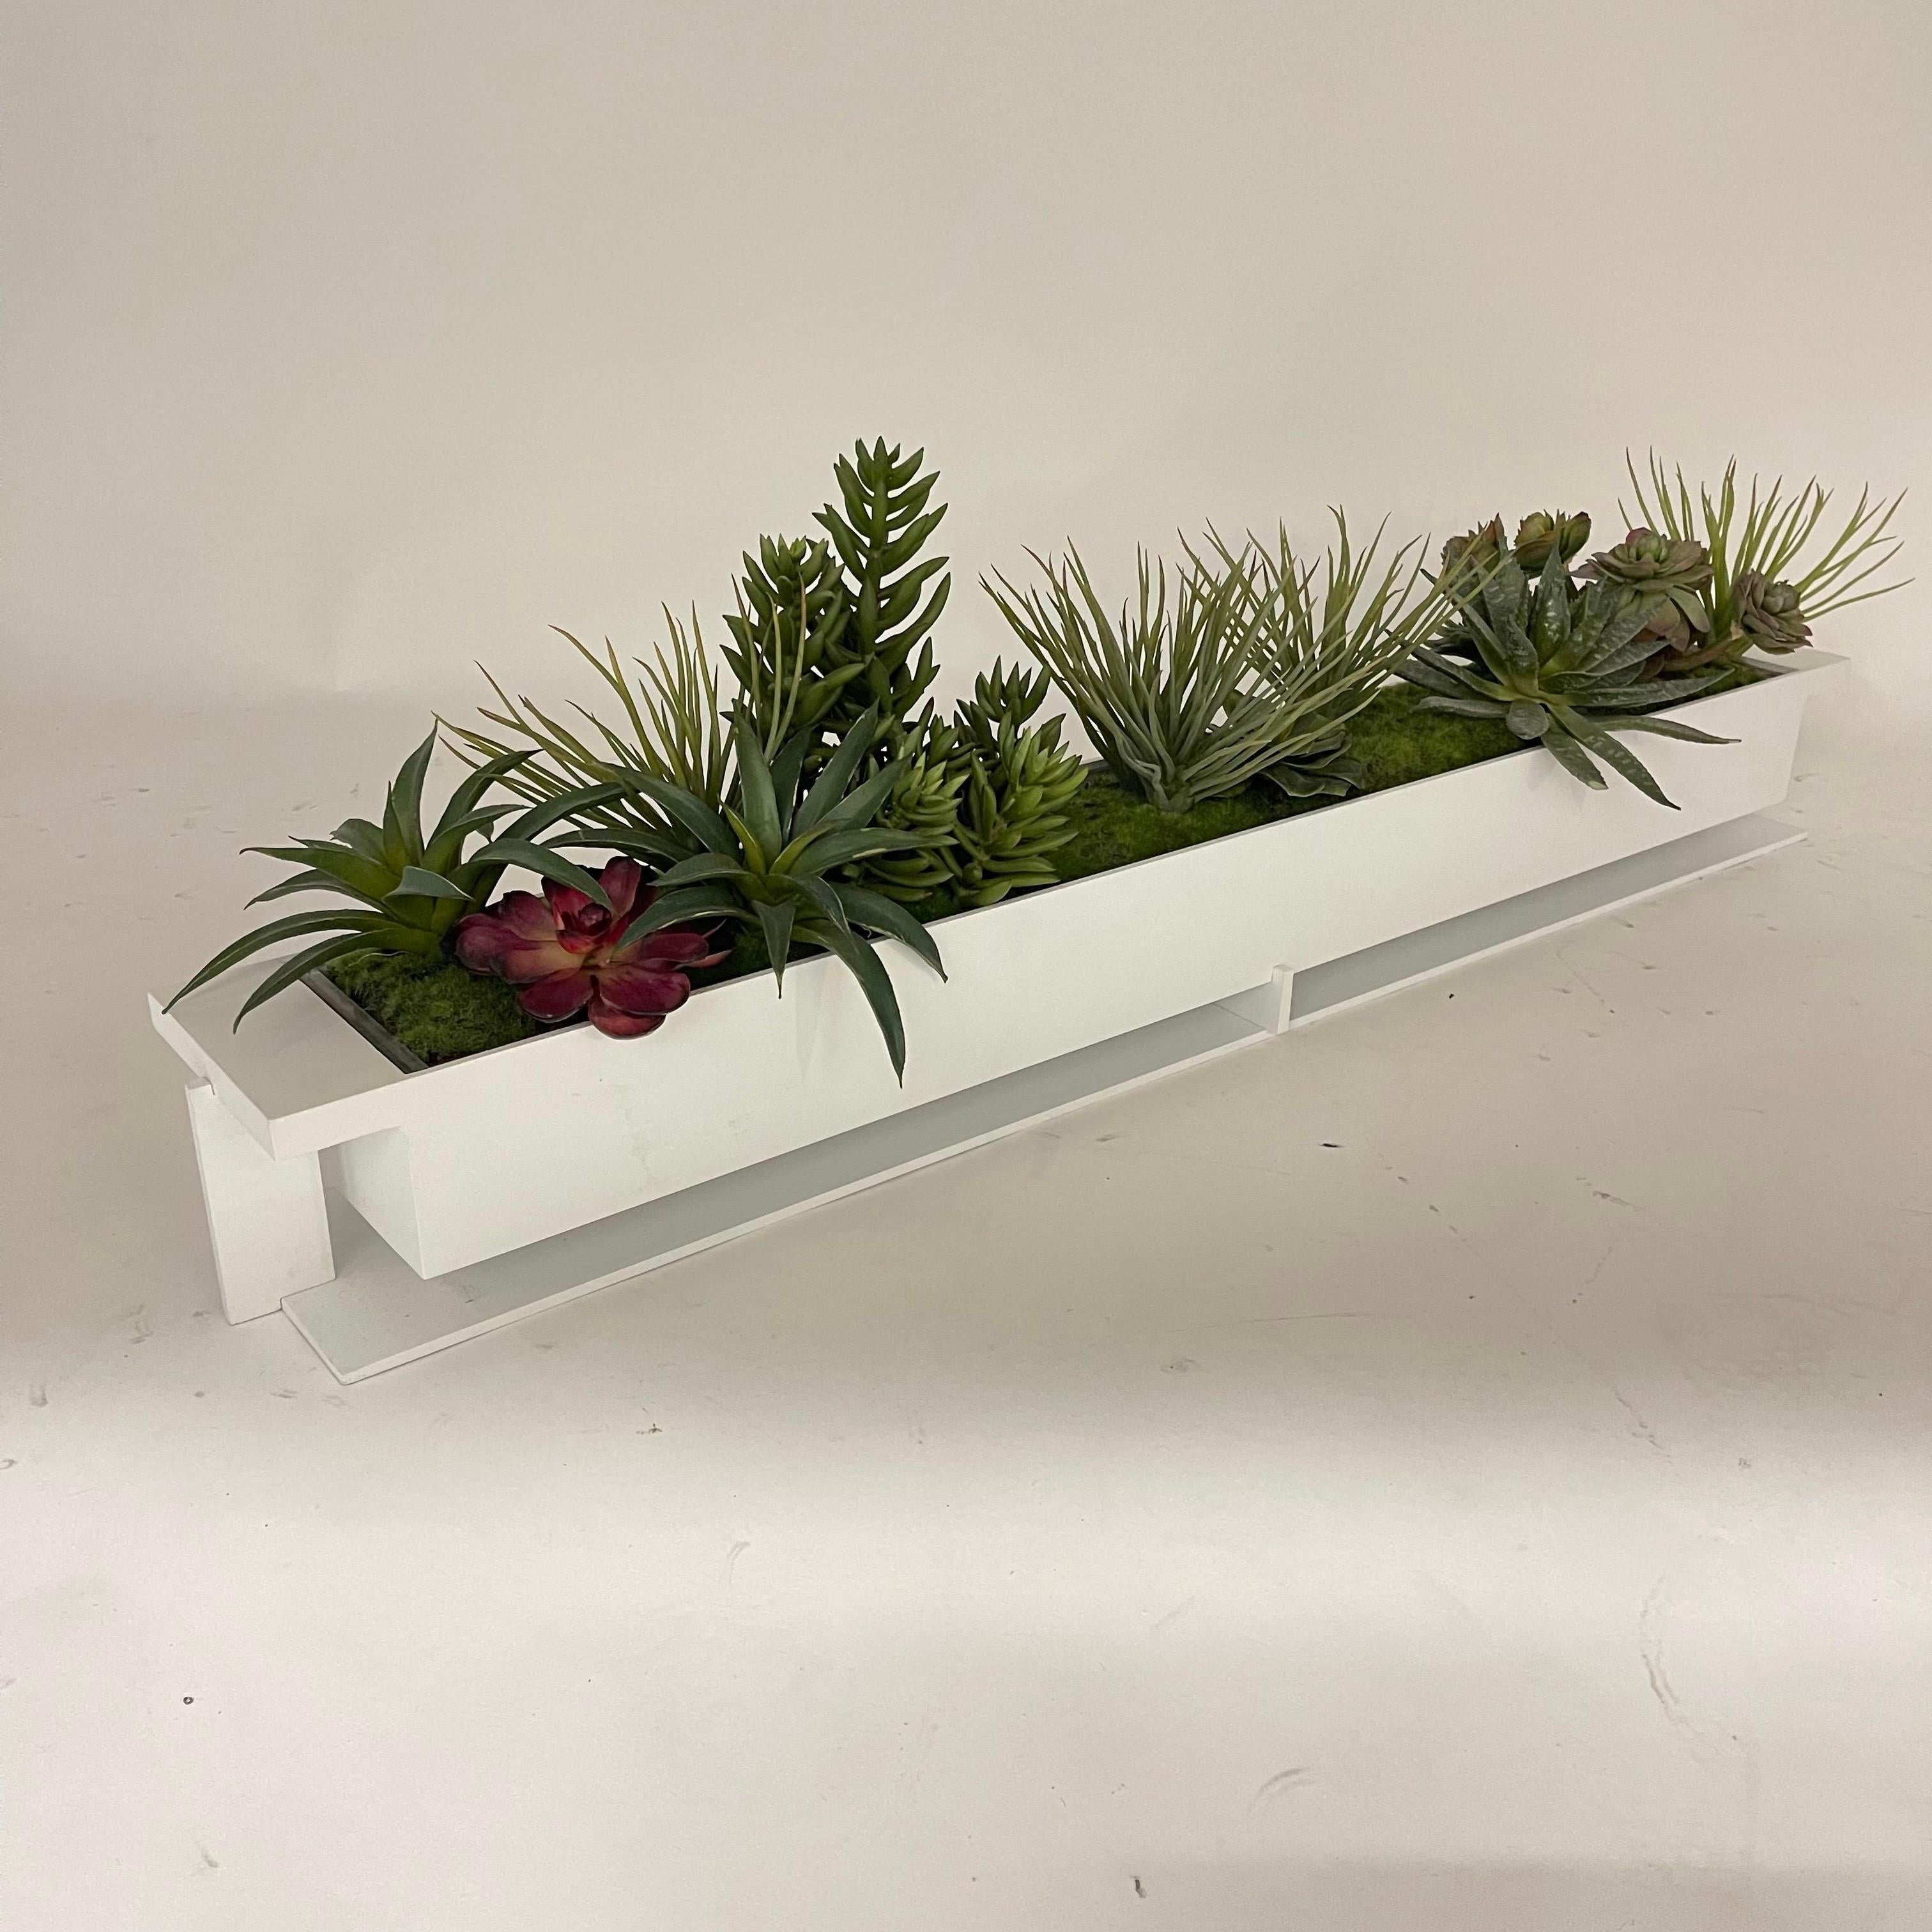 Versatile planter or centerpiece rendered in white powder coated cold steel with a clear translucent lucite acrylic insert and a decorative high end faux succulent arrangement.  USA, 2020.

can be used indoor or outside, can be used with or without